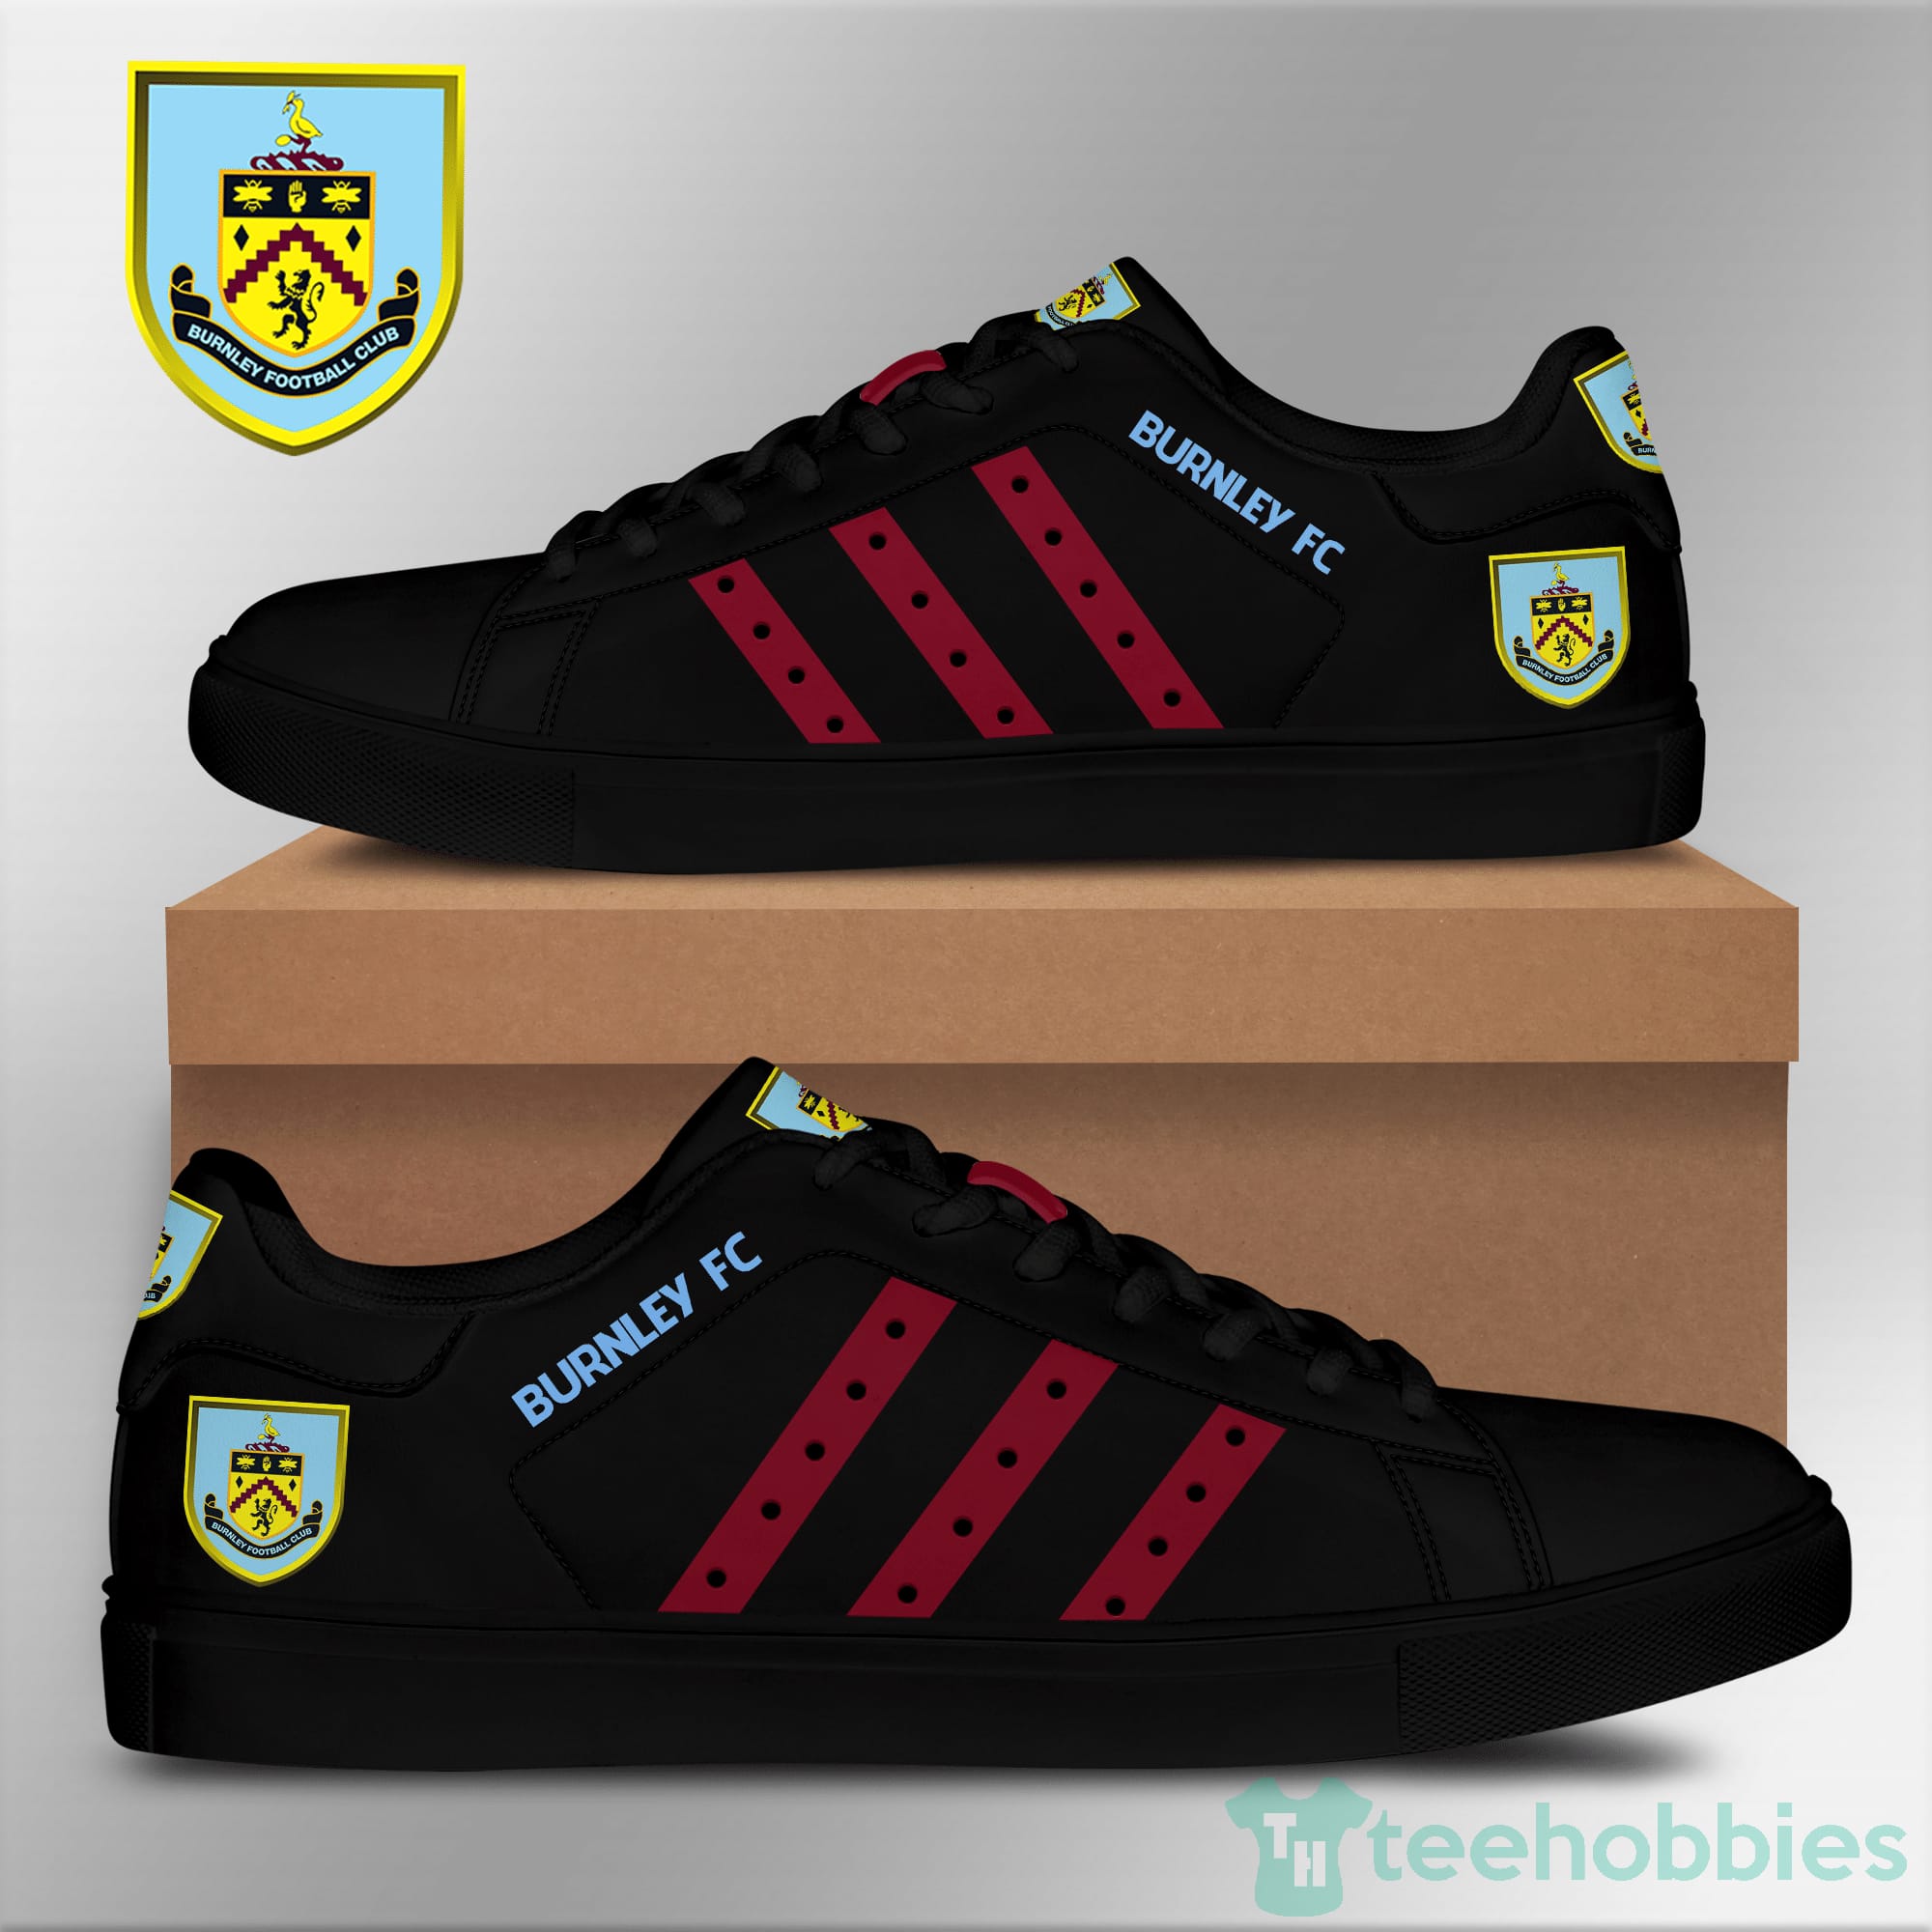 Burnley F.C Black Low Top Skate Shoes Product photo 2